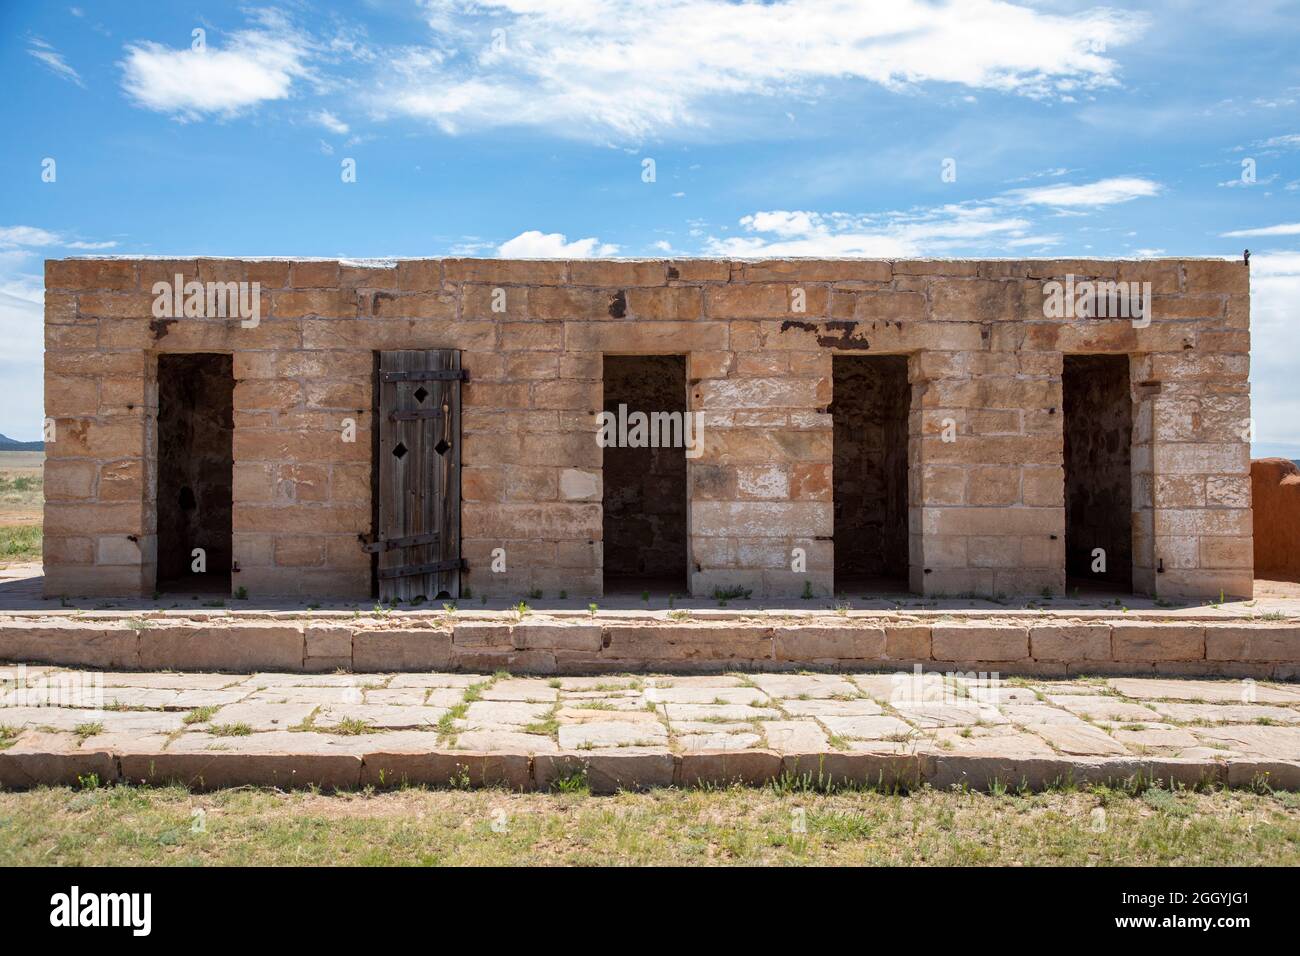 Watrous, New Mexico - The cell block is all that remains of the military prison at Fort Union National Monument. From 1851-1891, Fort Union defended t Stock Photo